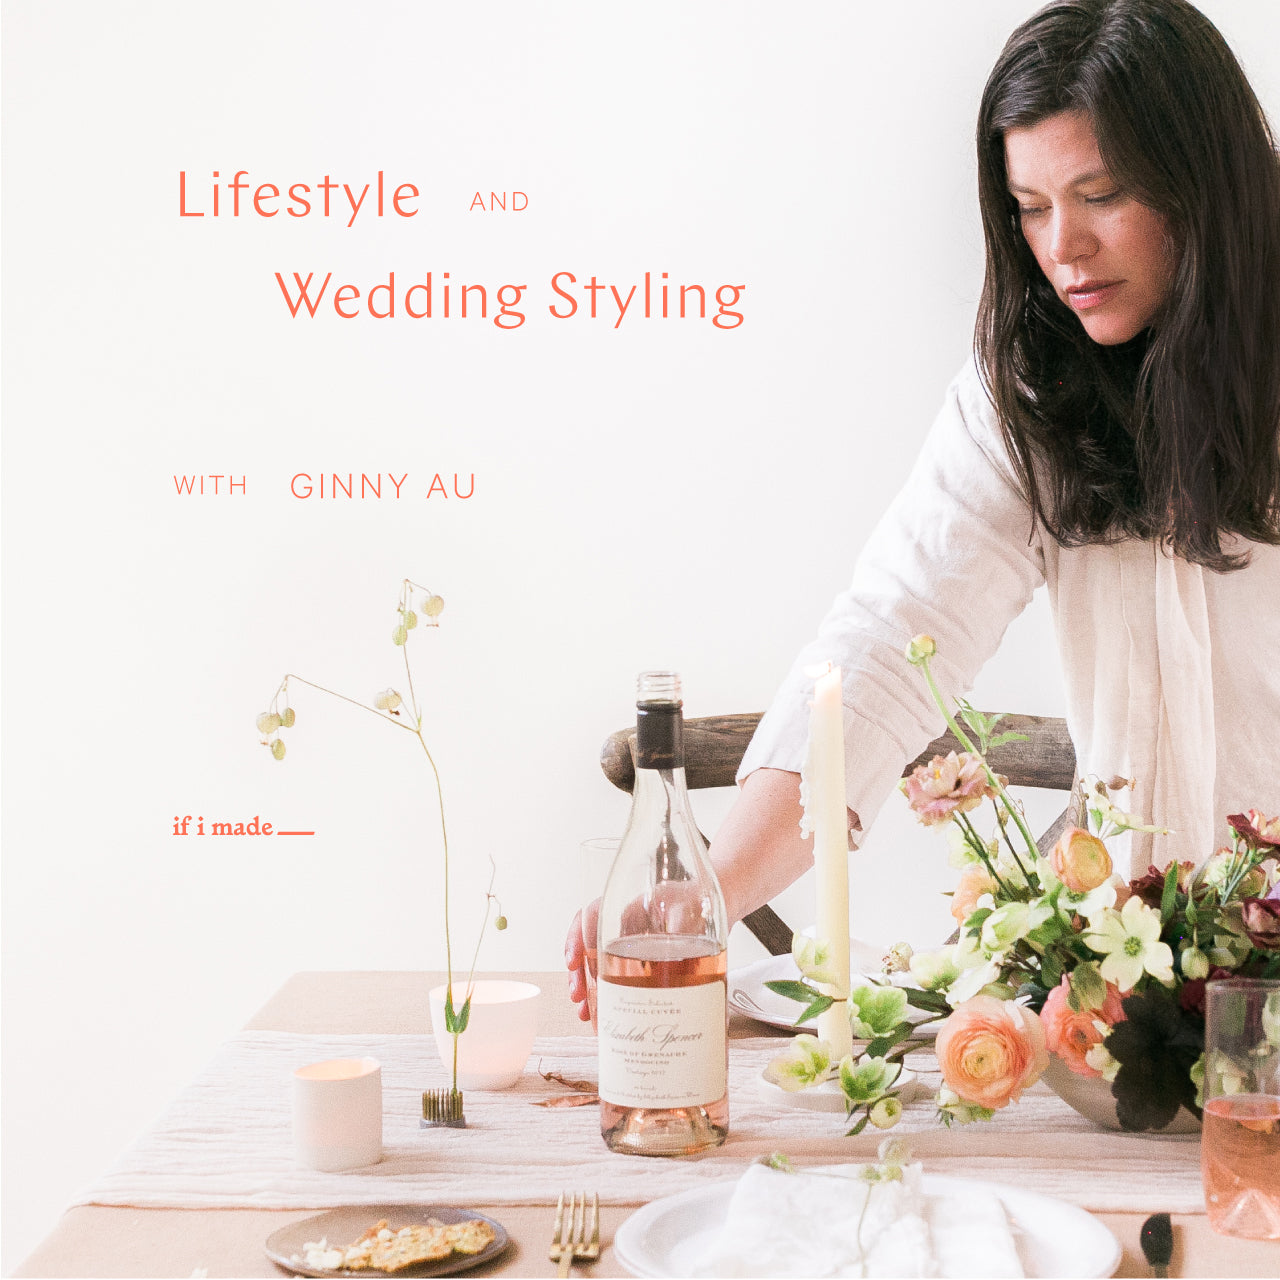 Lifestyle and Wedding Styling by Ginny Au (ROP)